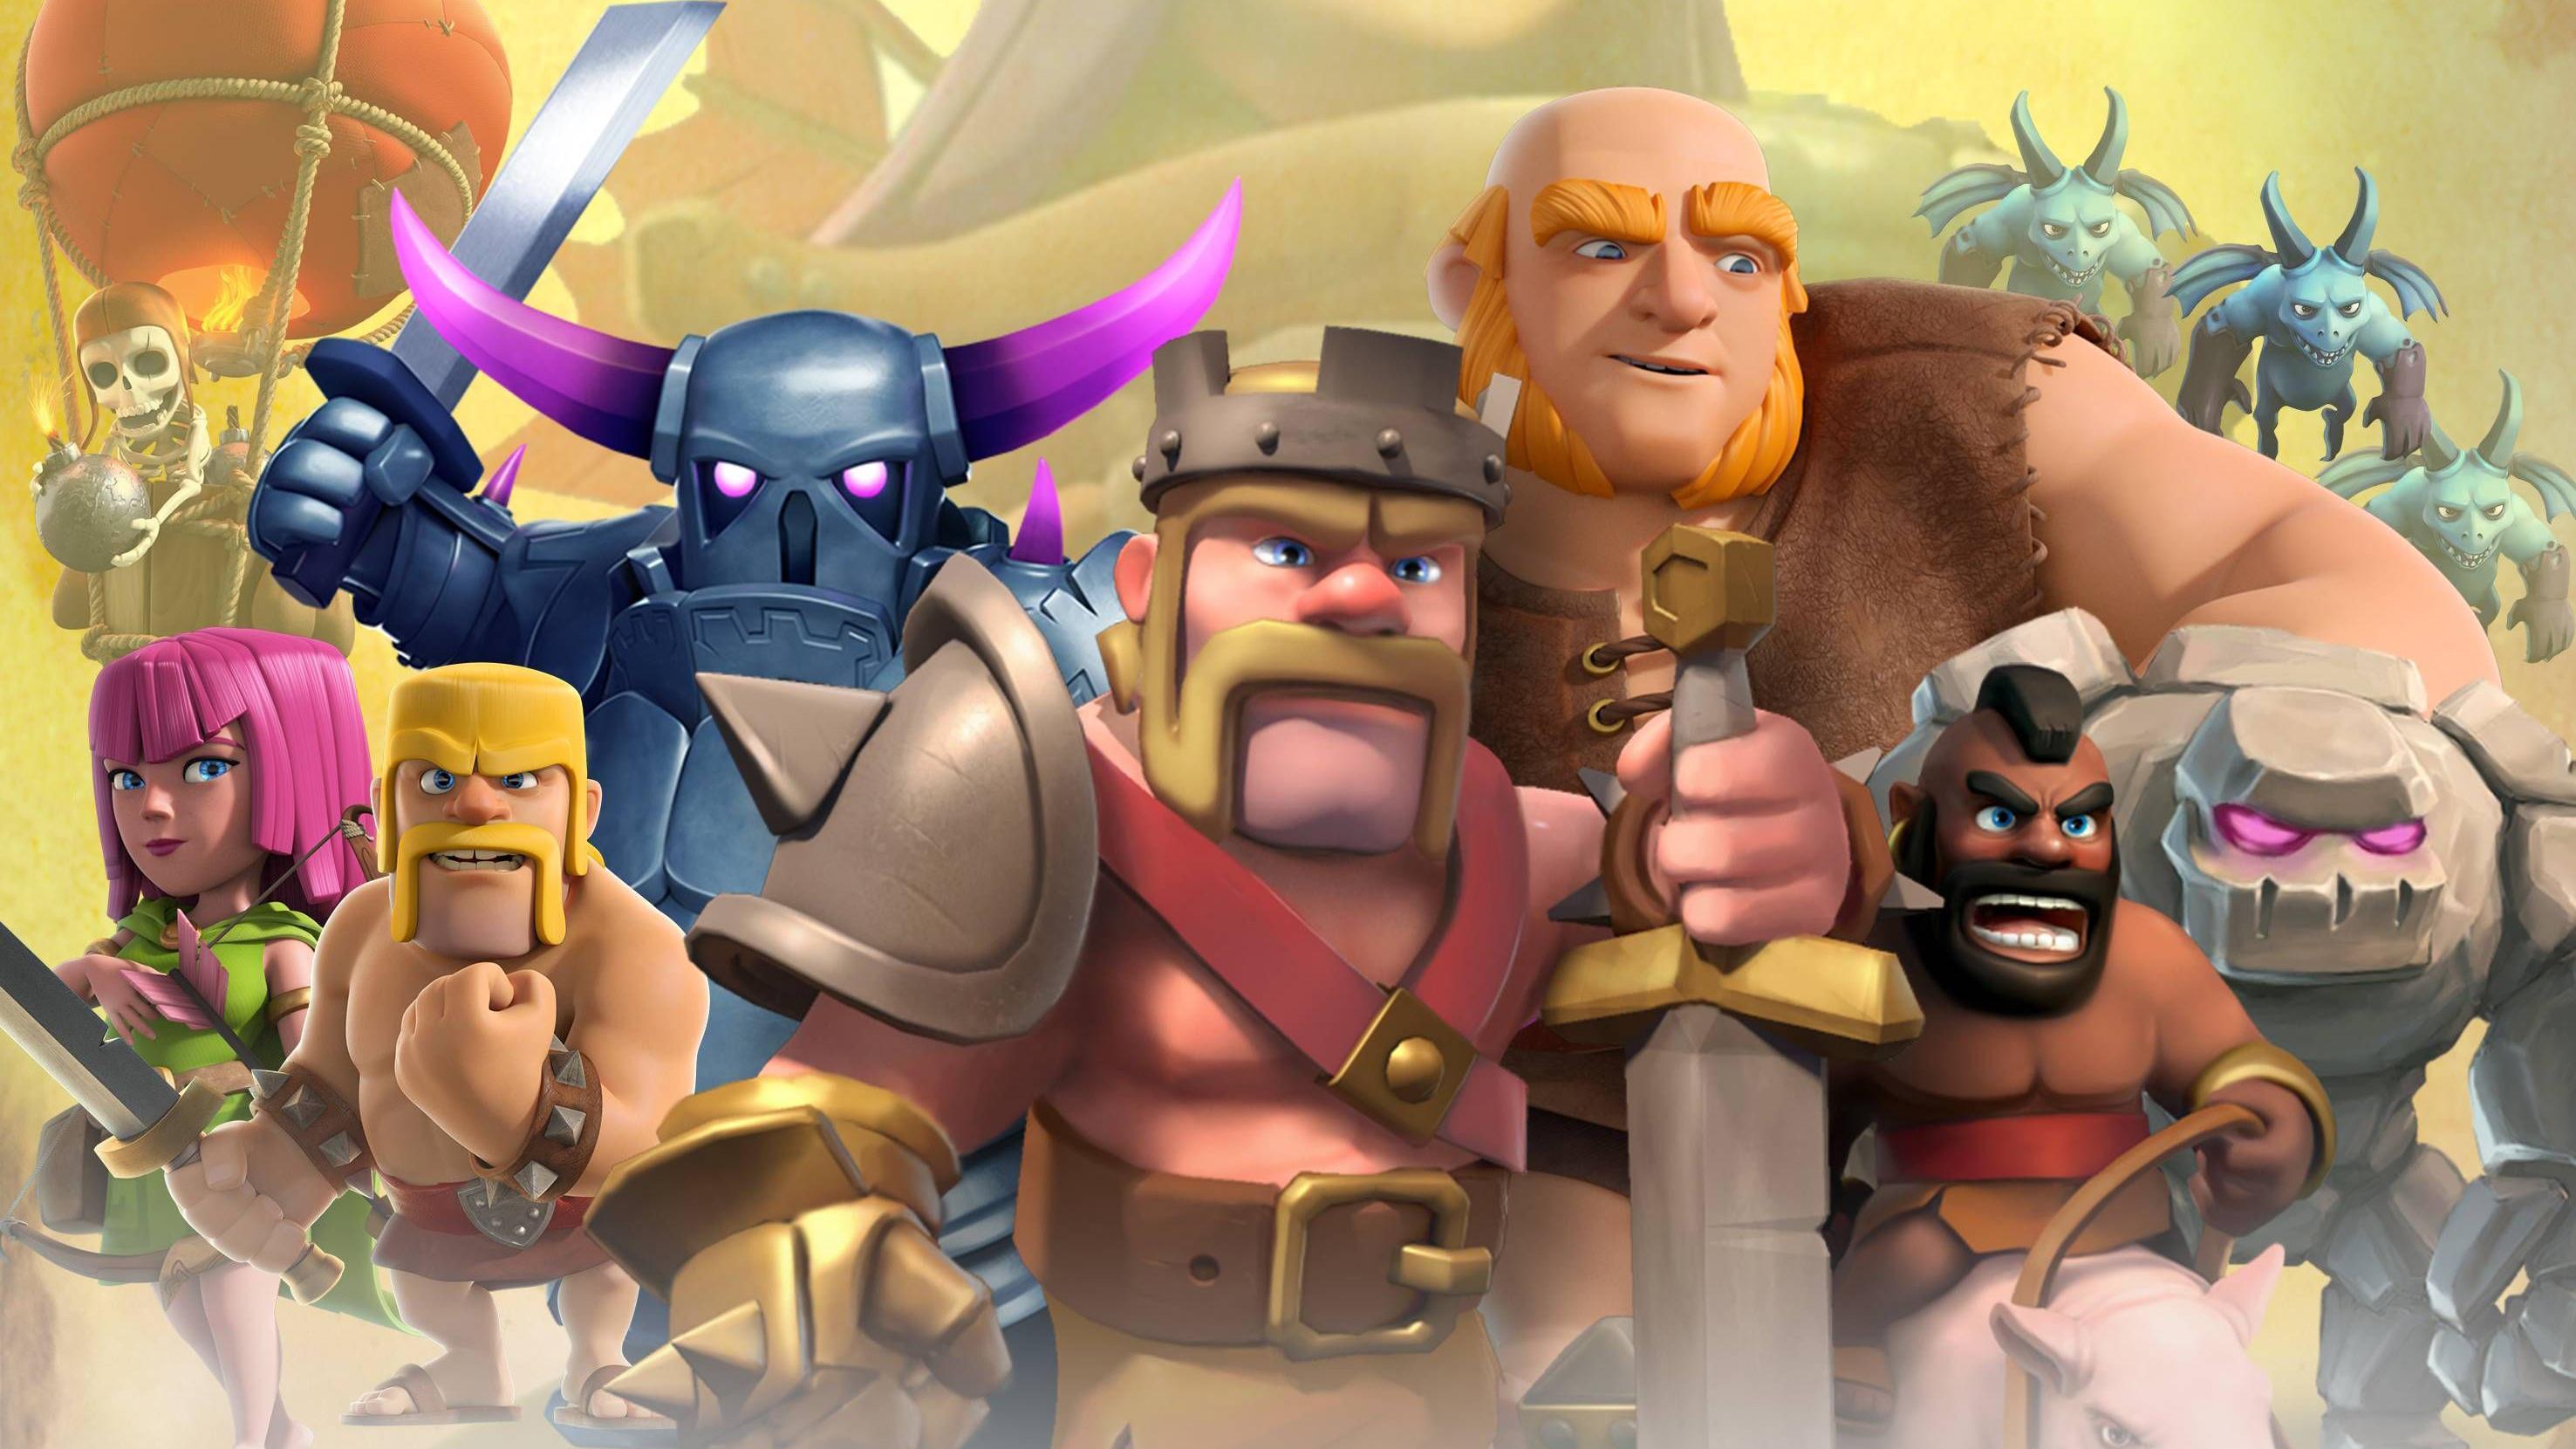 HD wallpaper, Archer, Hog Rider, Clash Of Clans, Games, Pekka, Barbarian, Hd, Supercell, Giant